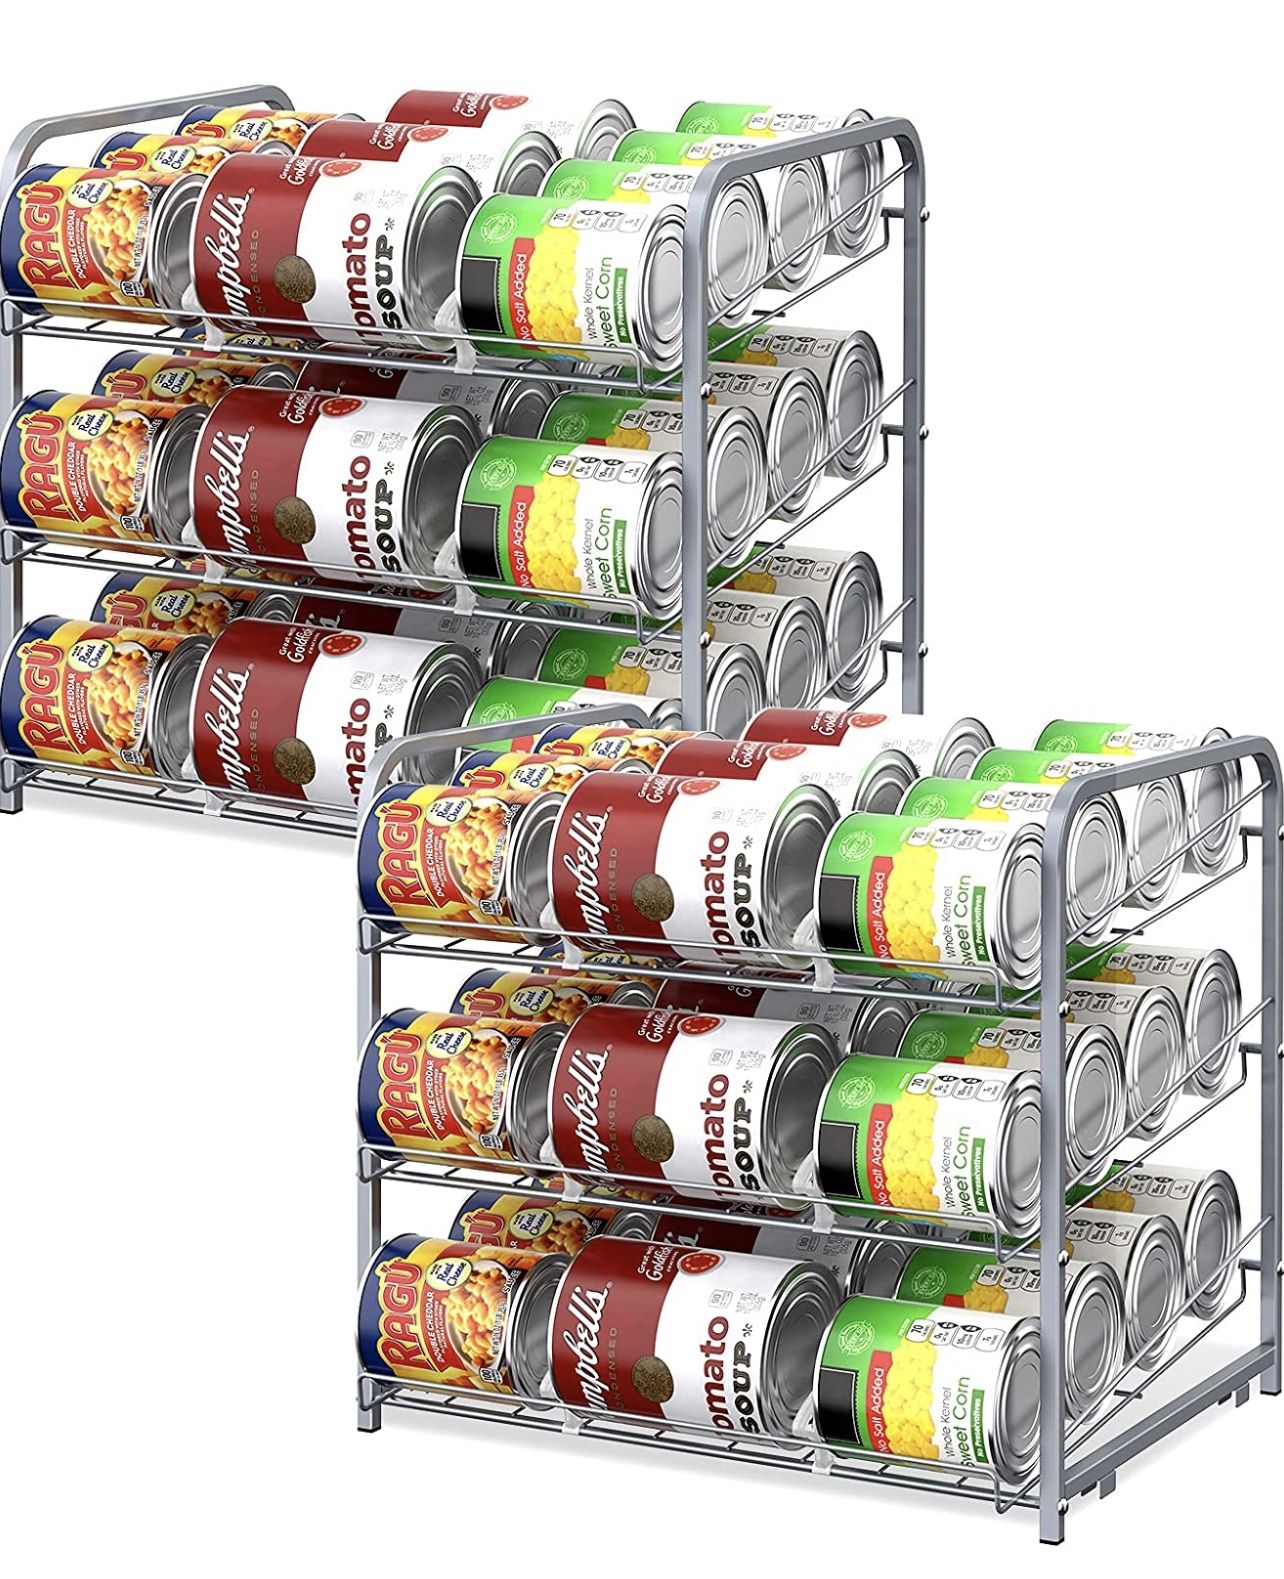 Vrisa 2 Pack Can Organizer for Pantry Stackable Can Storage Dispenser Holds Up to 72 Cans Can Holders for Kitchen Pantry Cabinet Silver